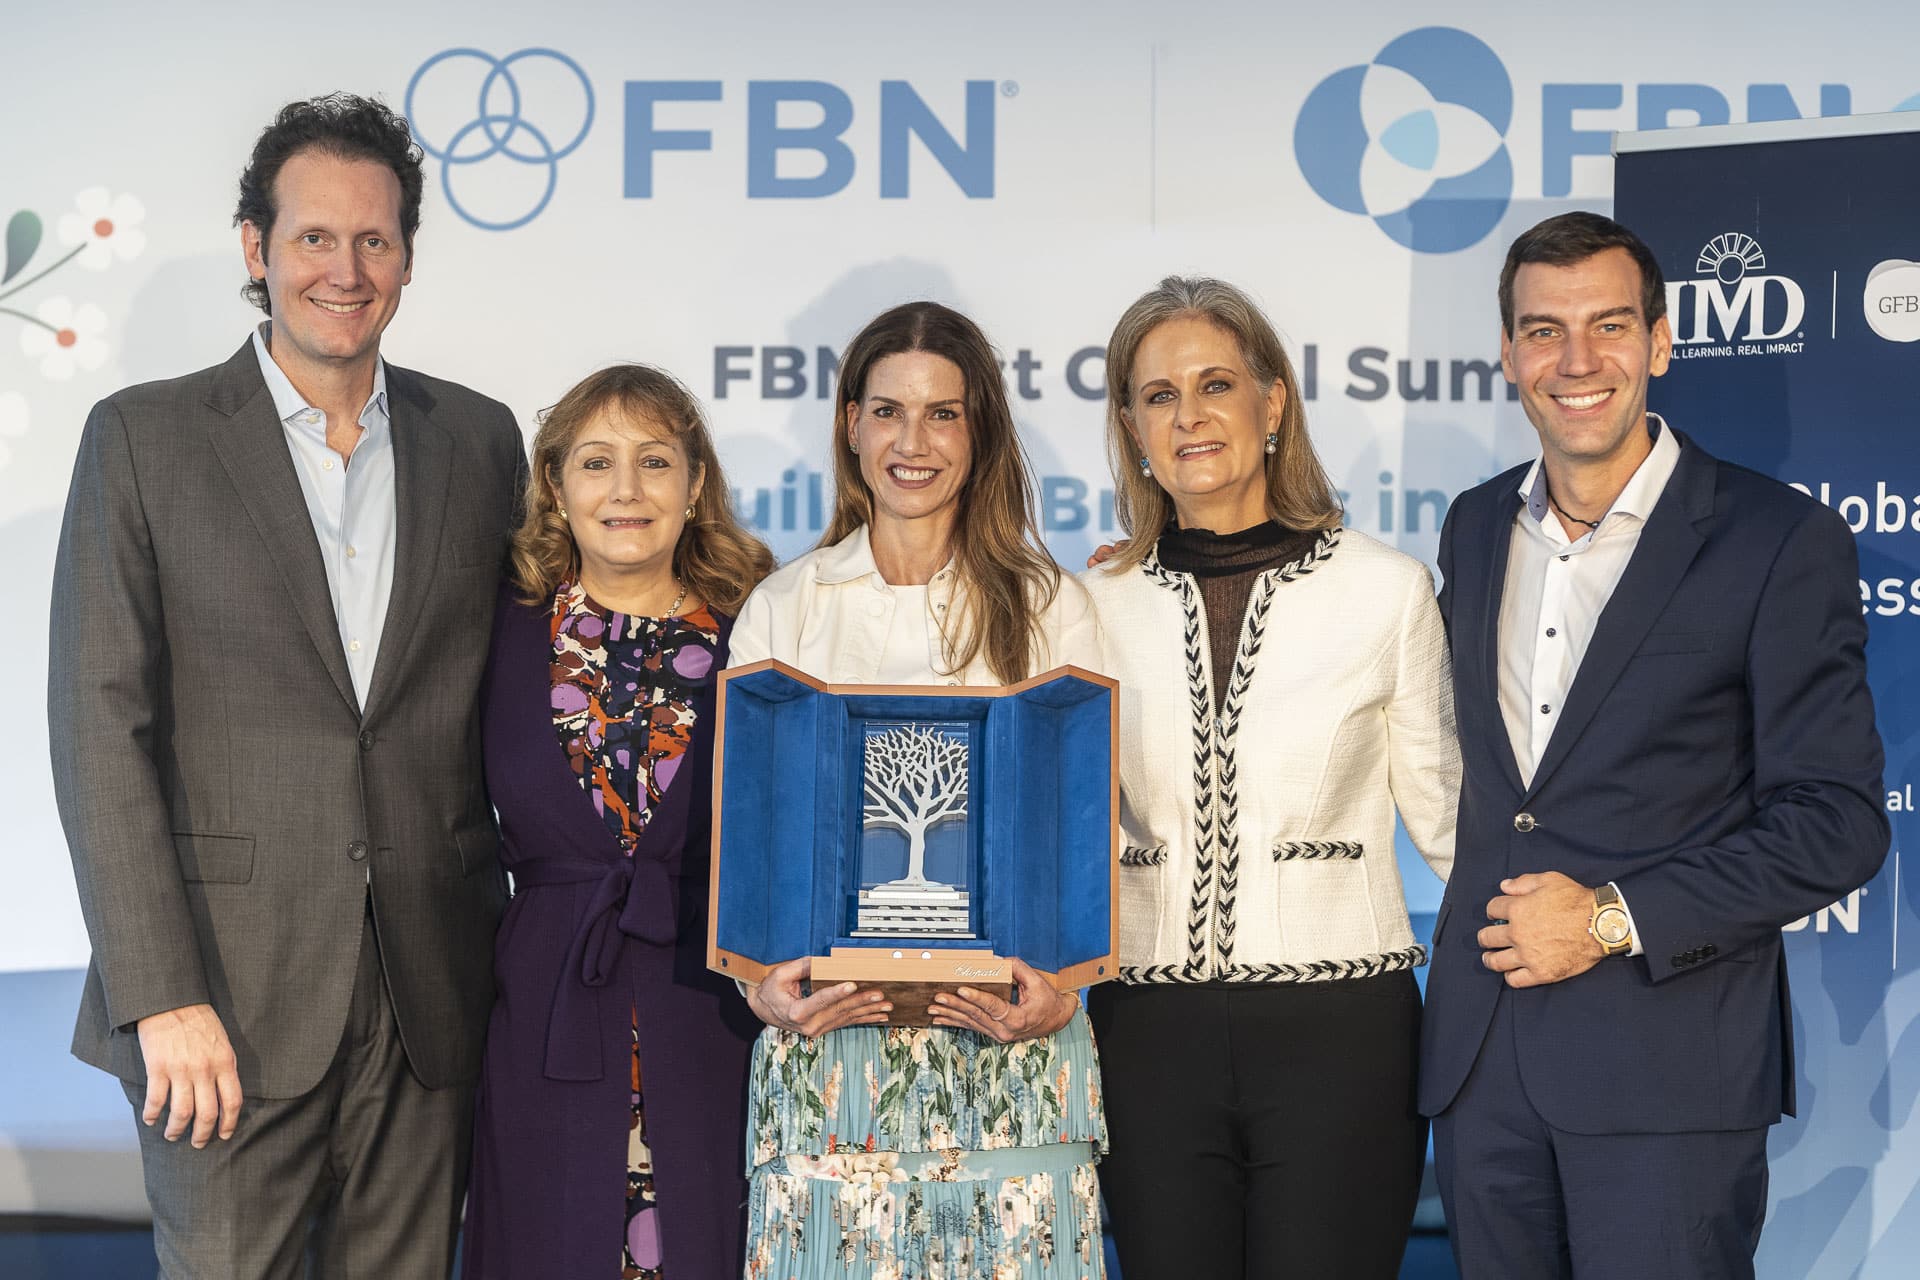 Colombia’s Carvajal wins 2022 IMD Global Family Business Award